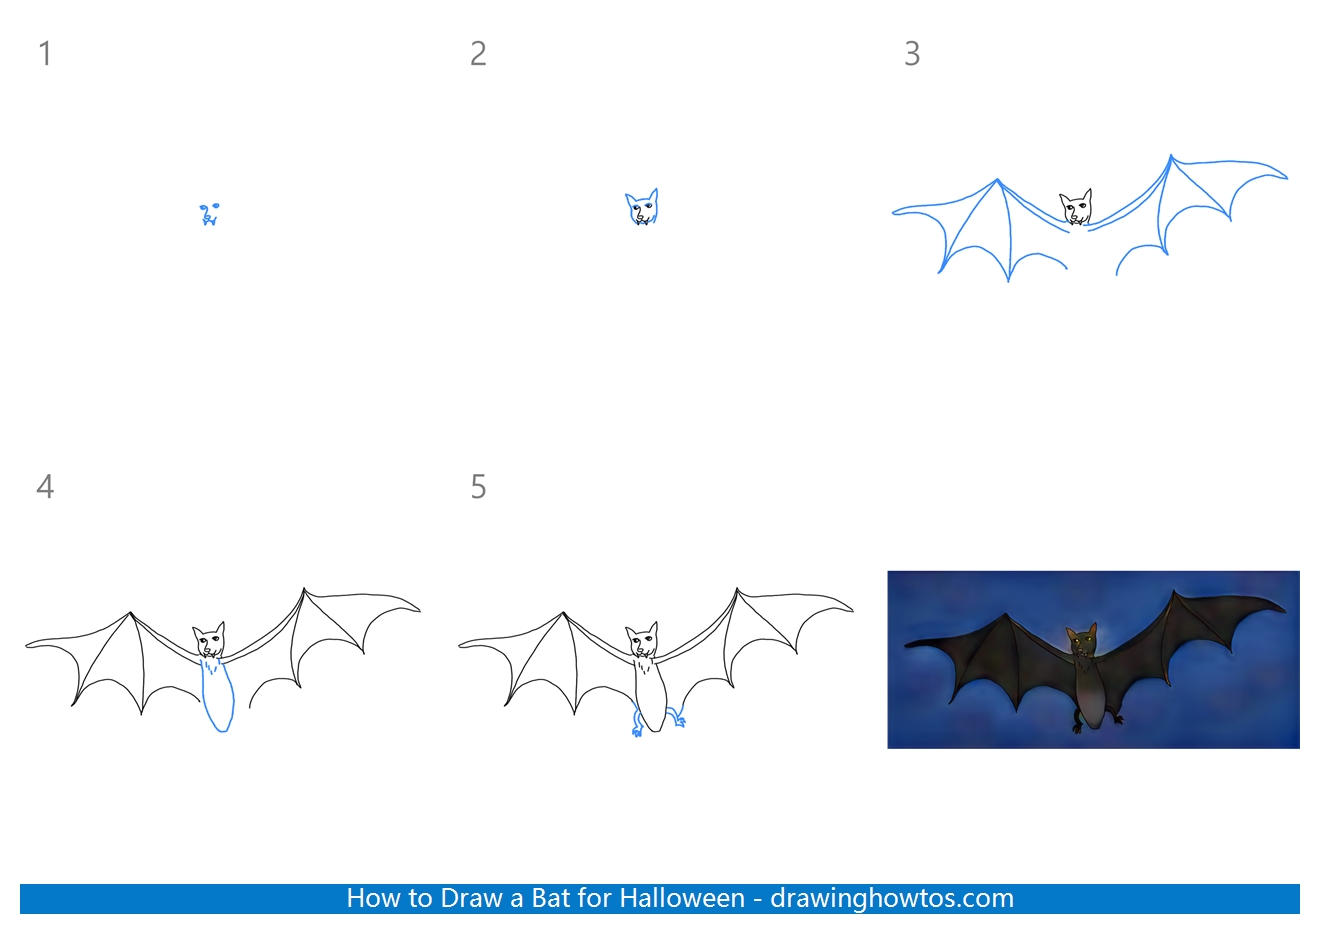 How to Draw a Bat for Halloween Step by Step